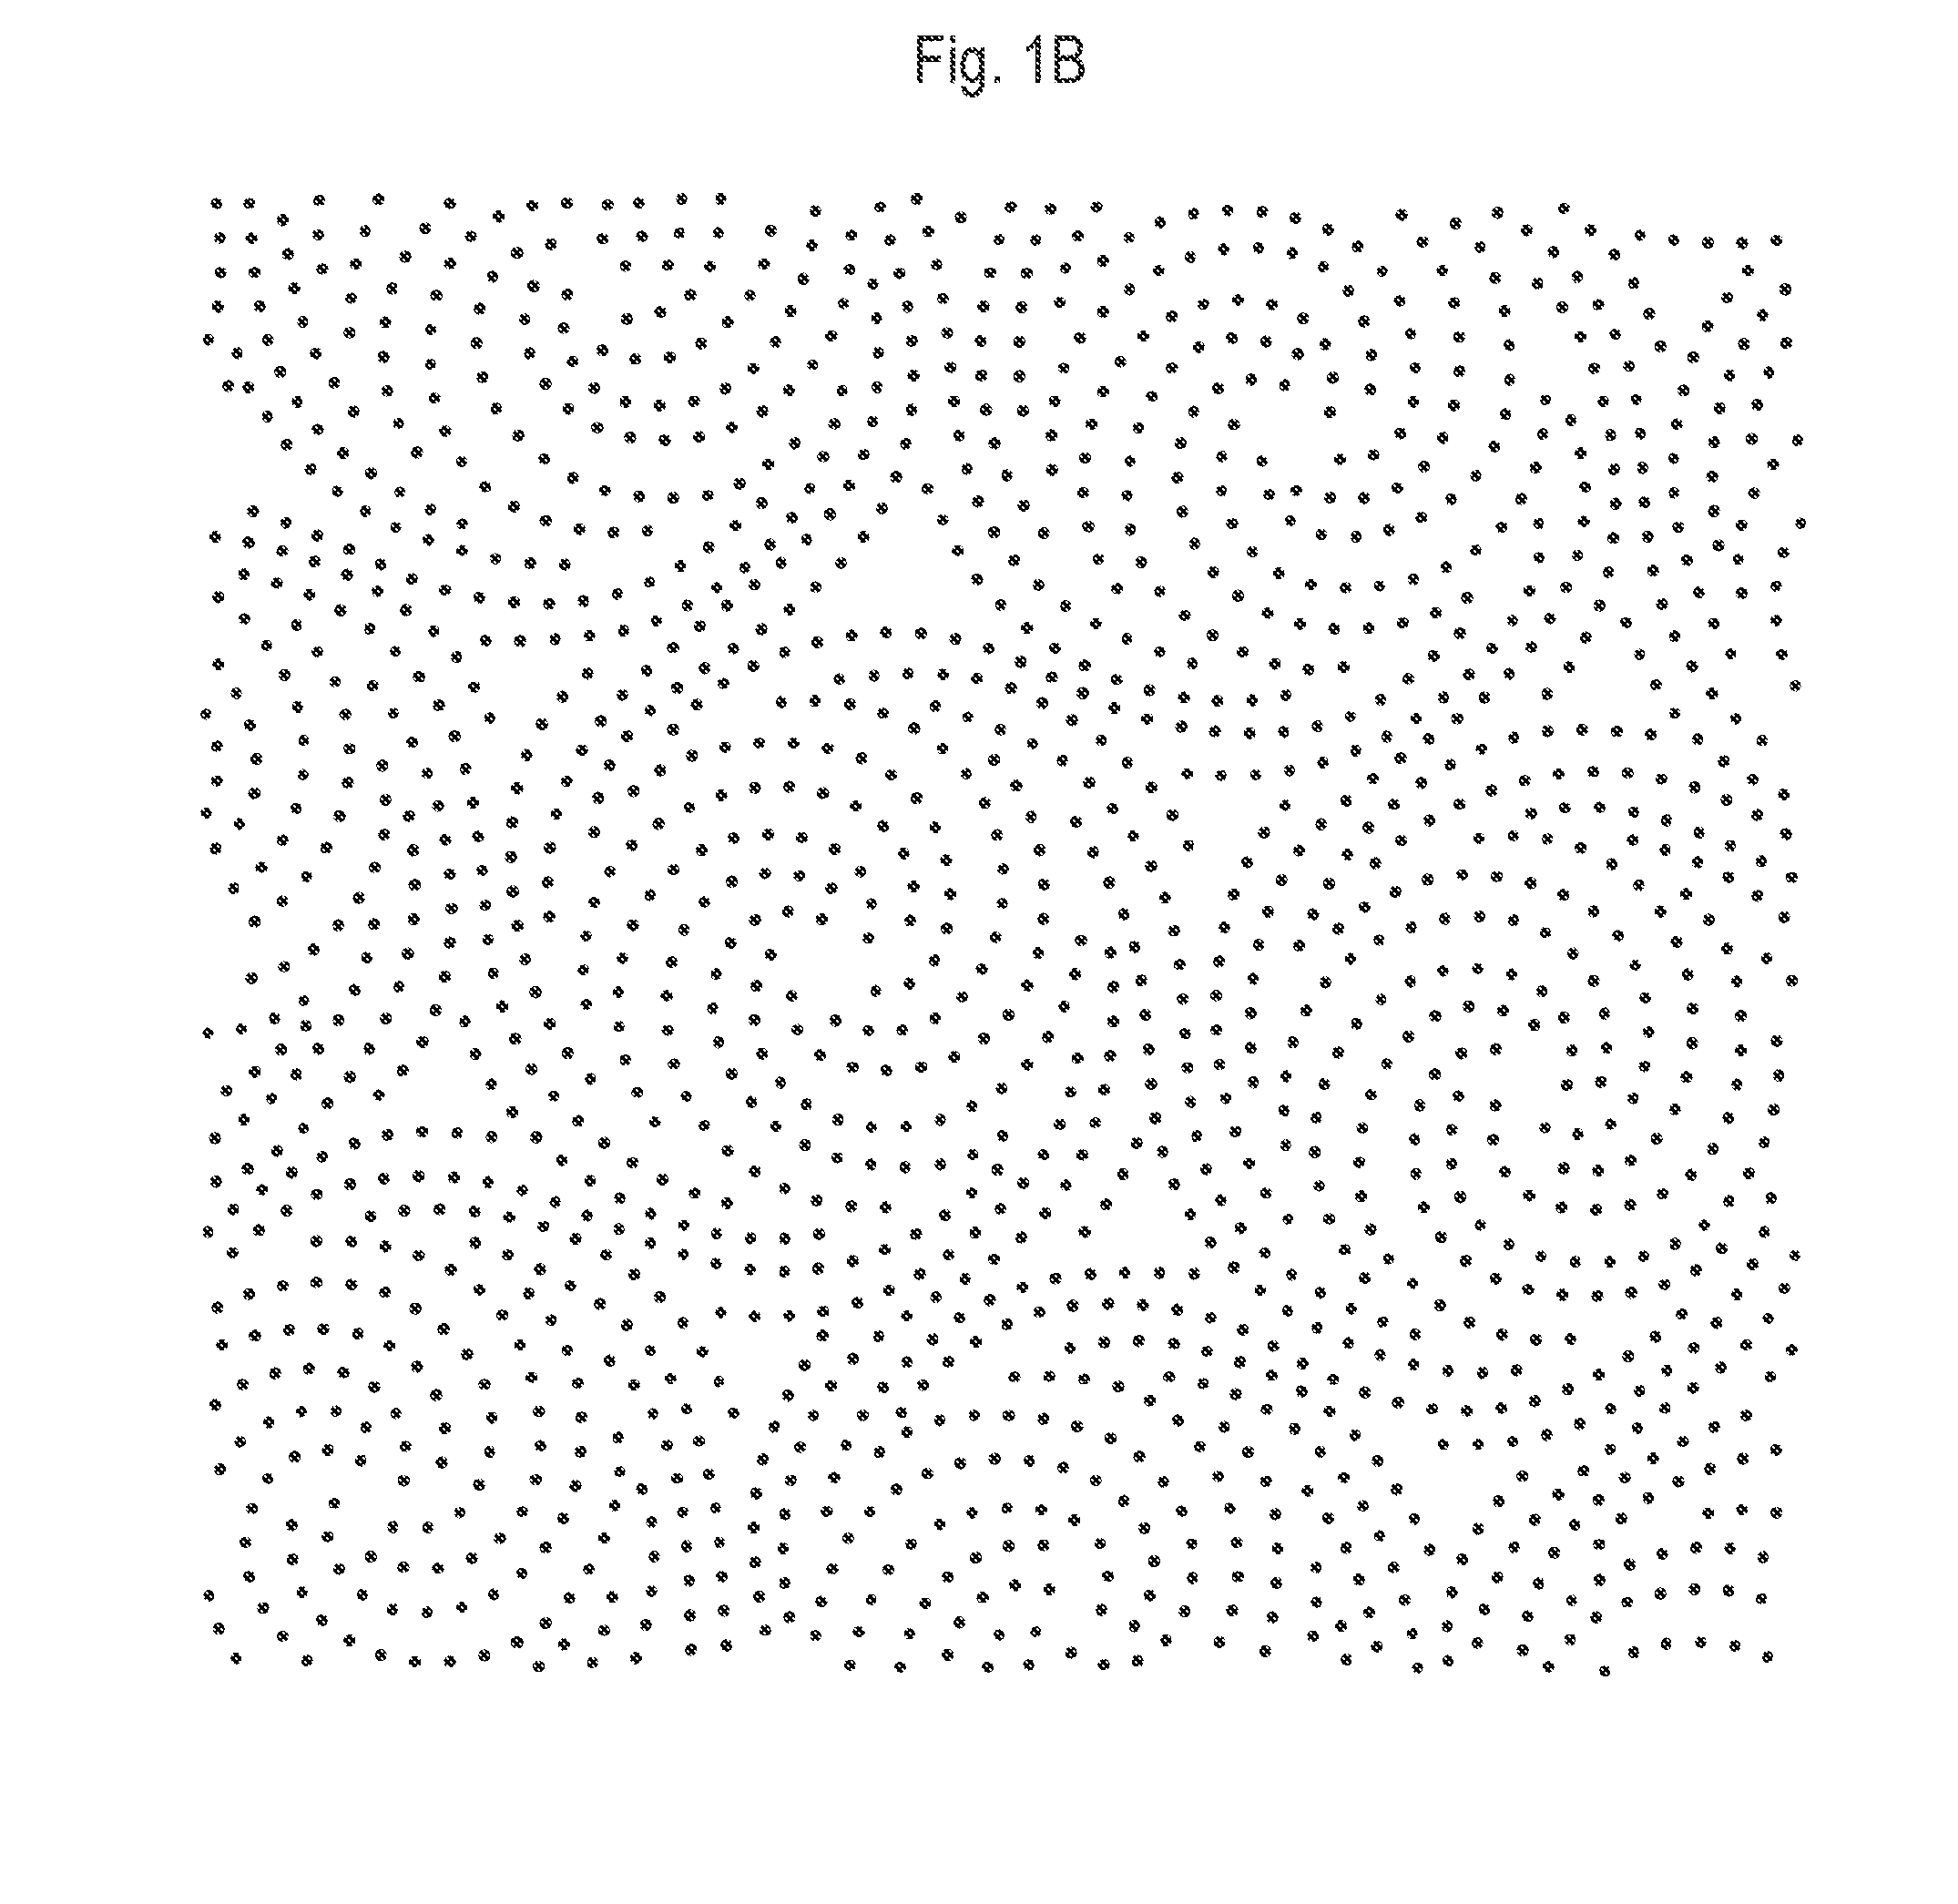 Method For Reducing The Bulk And Increasing The Density Of A Tissue Product